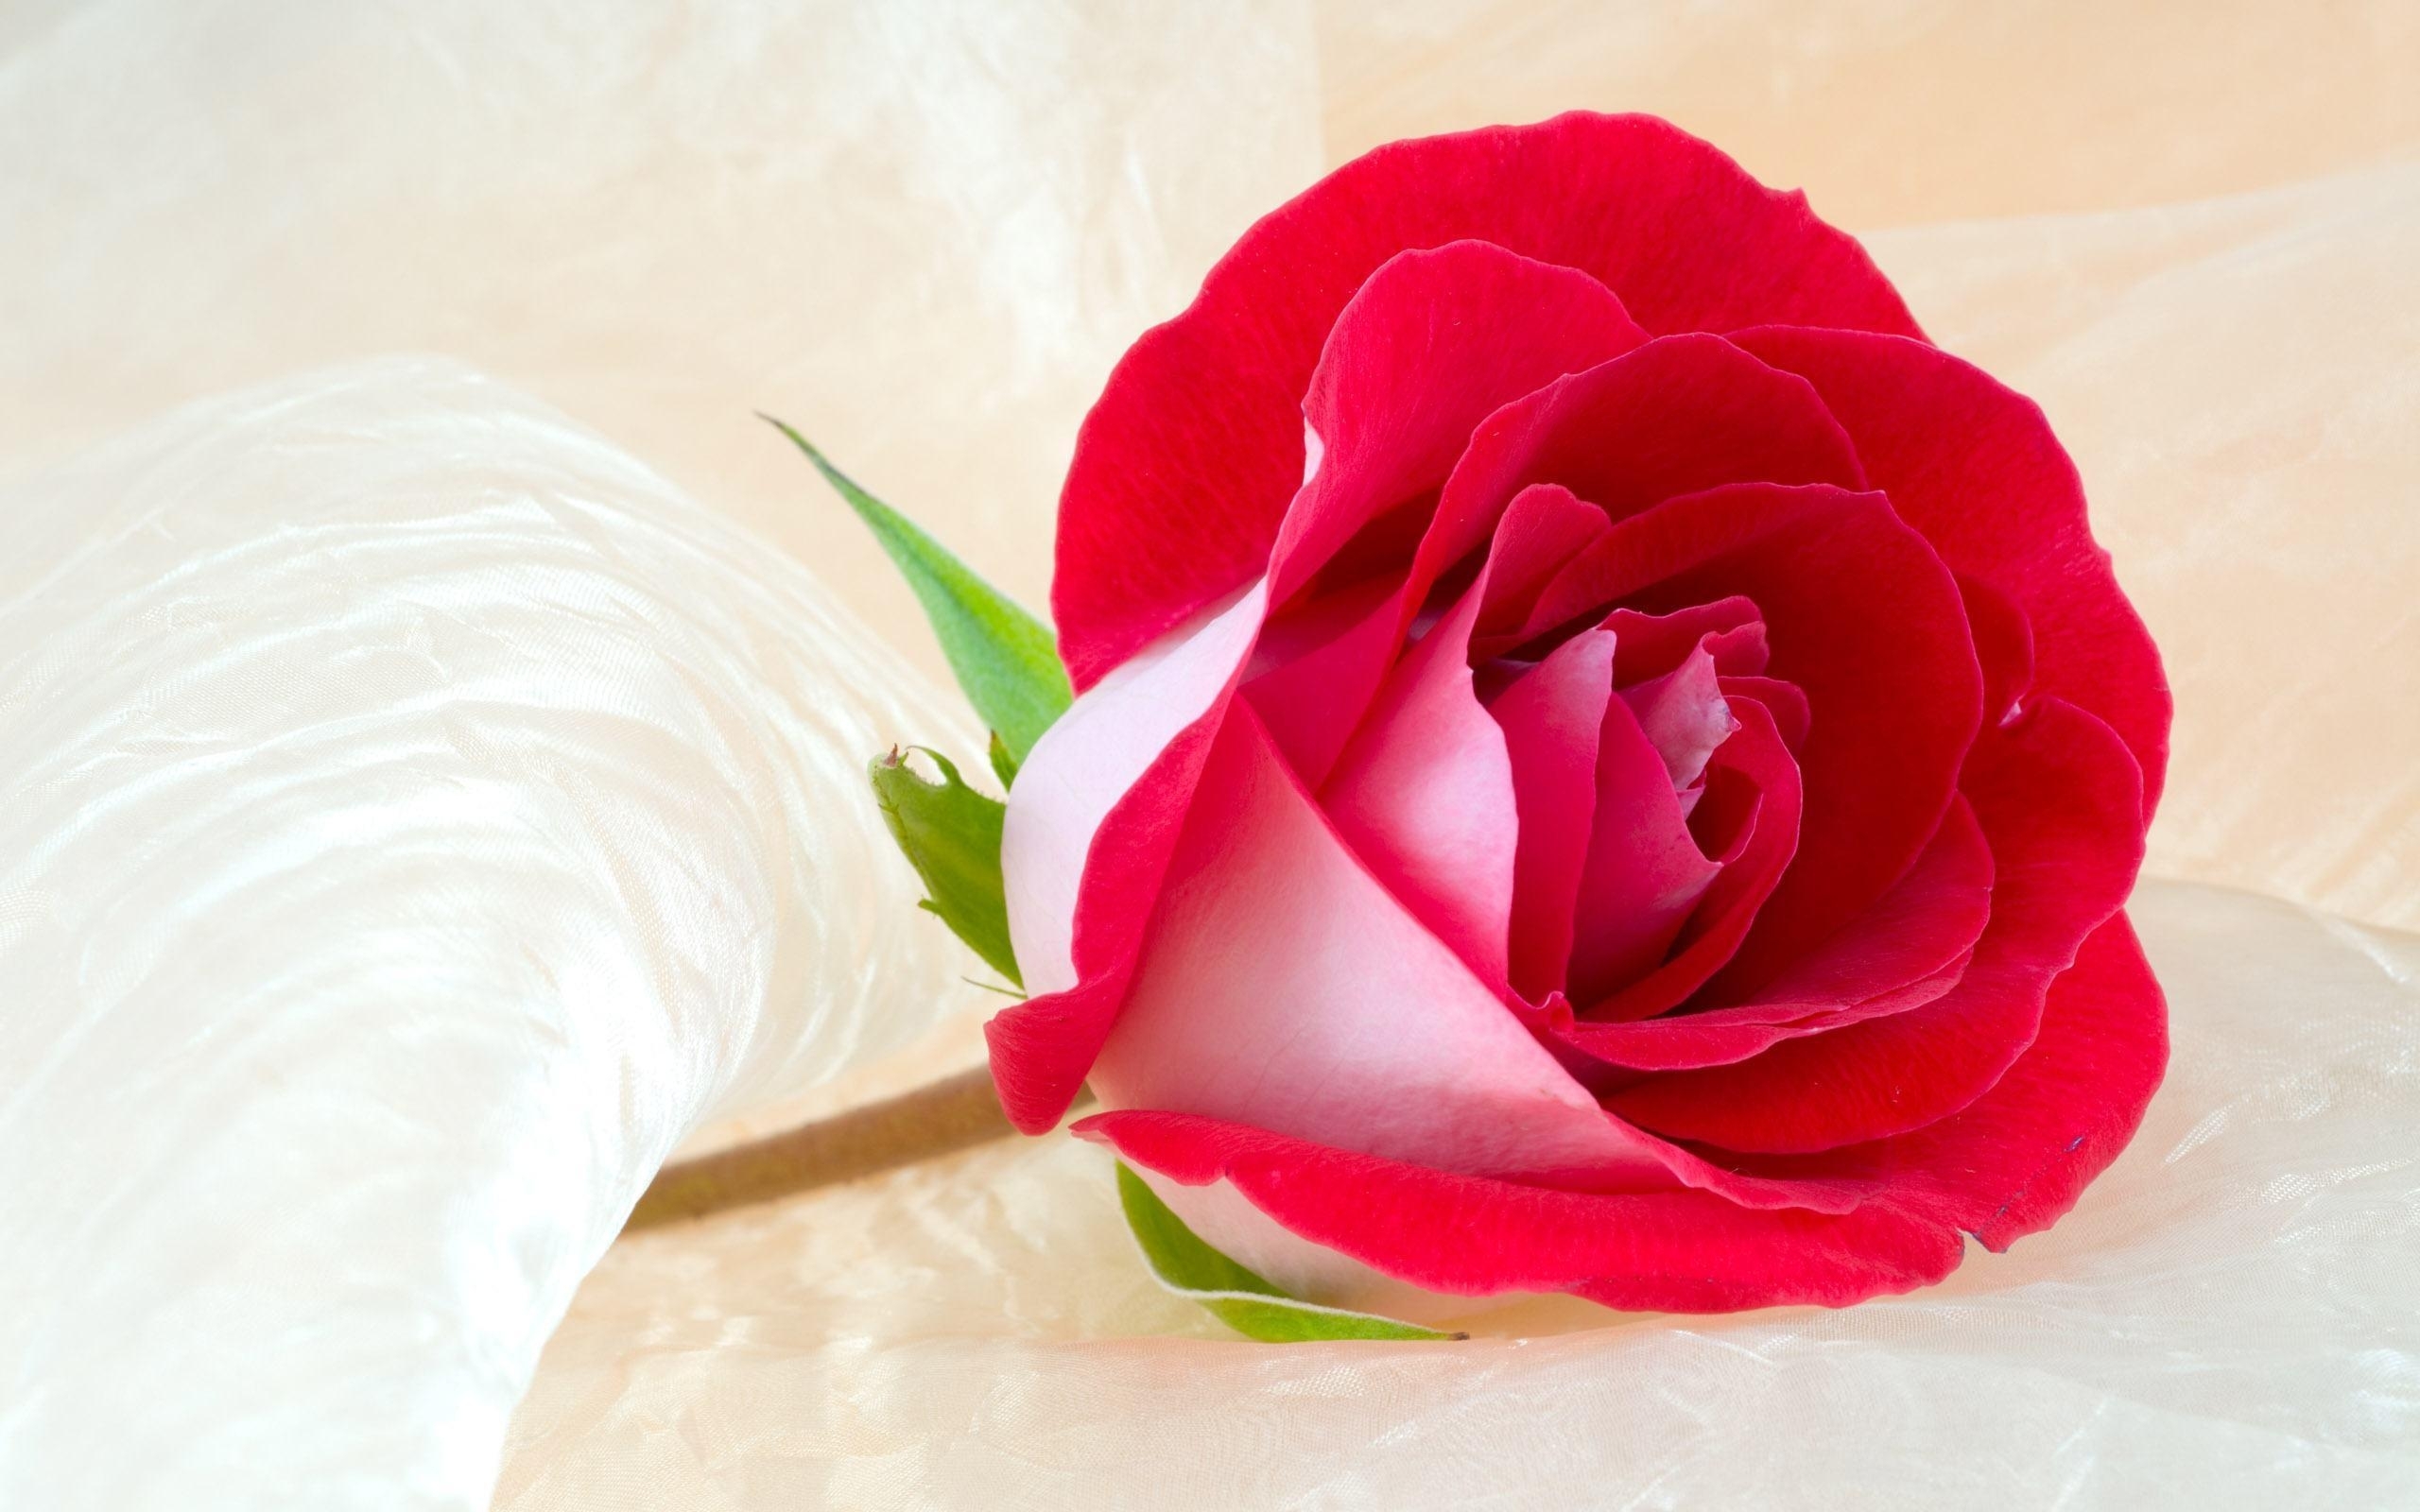 10 New Rose Wallpapers Free Download FULL HD 1920×1080 For PC Background